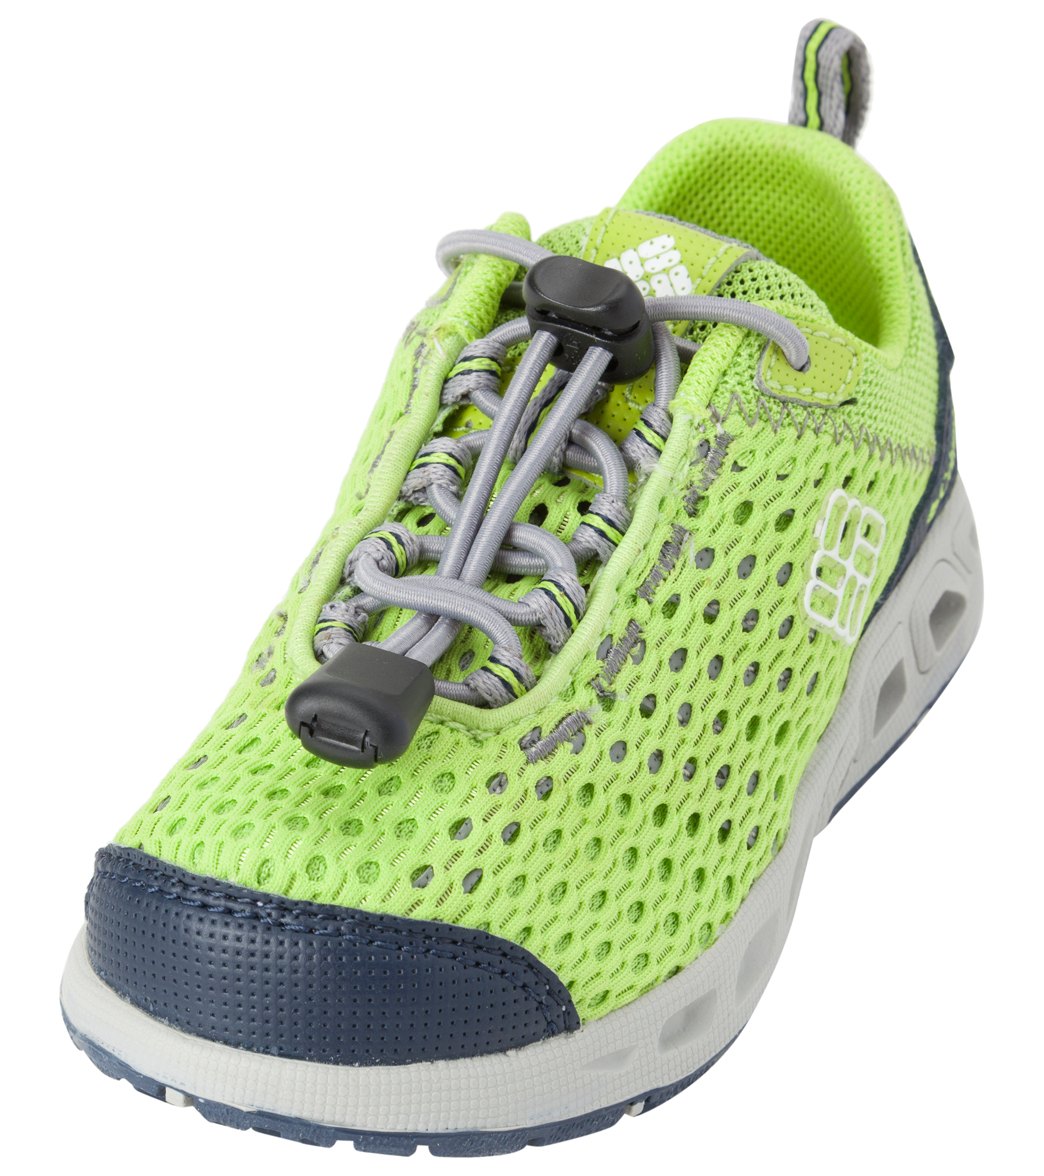 Columbia Kids' Drainmaker Iii Water Shoes - Fission/Sea Salt 9 Rubber - Swimoutlet.com